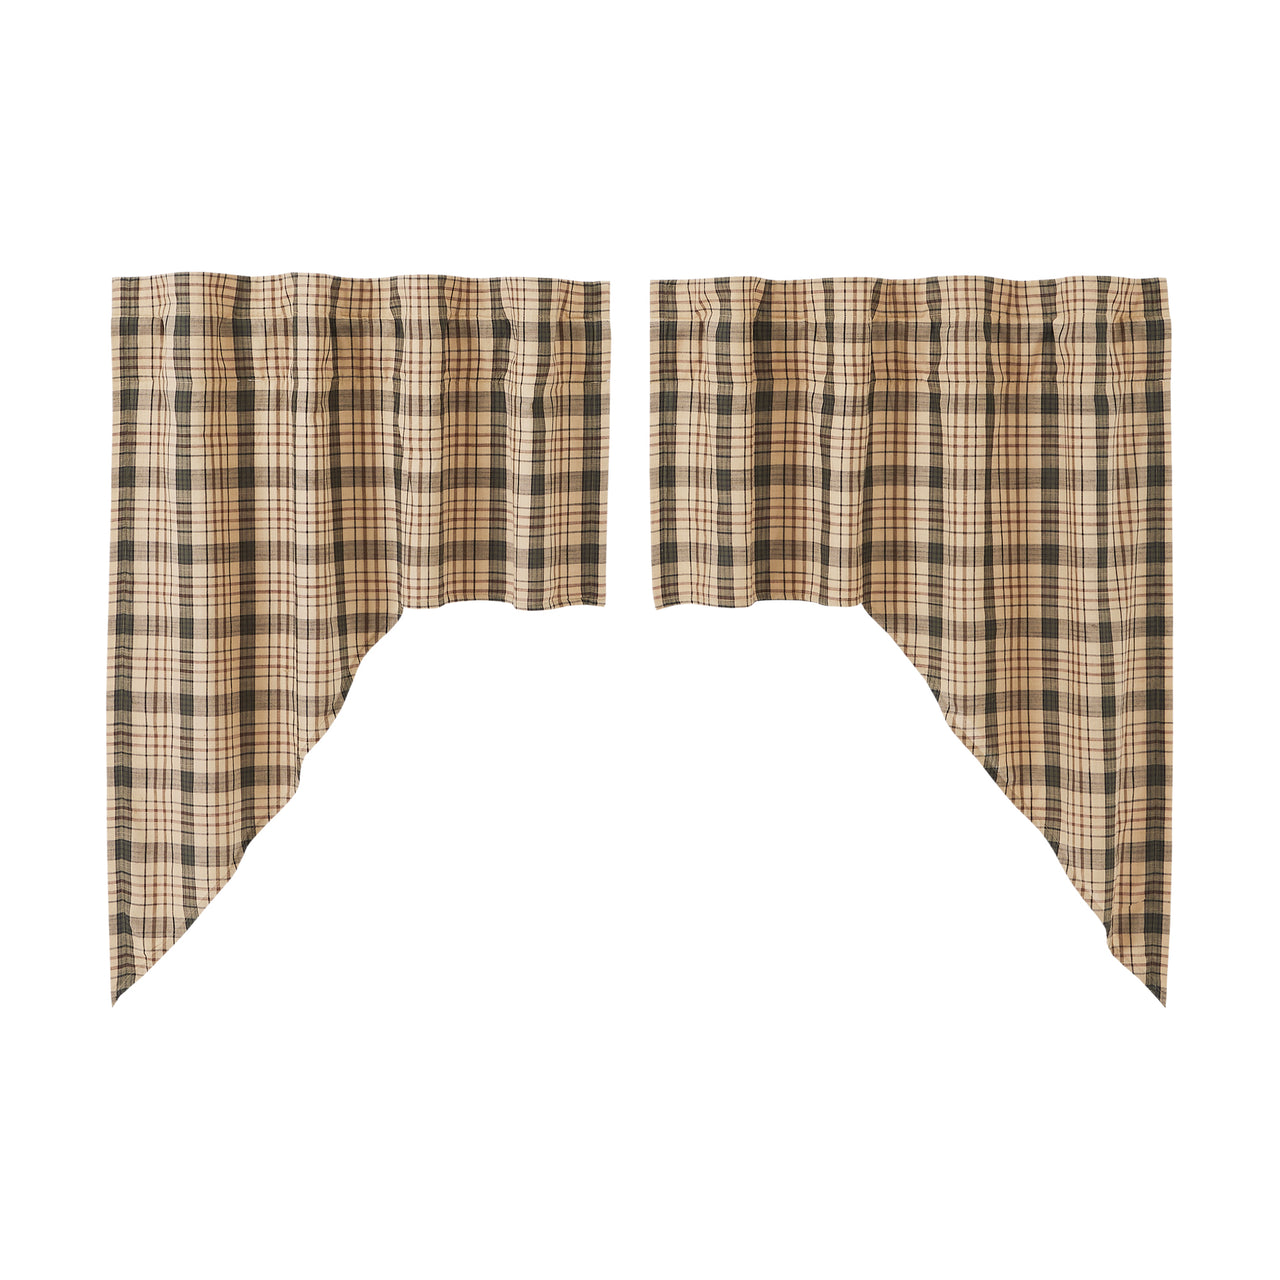 Cider Mill Plaid Swag Set of 2 36x36x16 VHC Brands